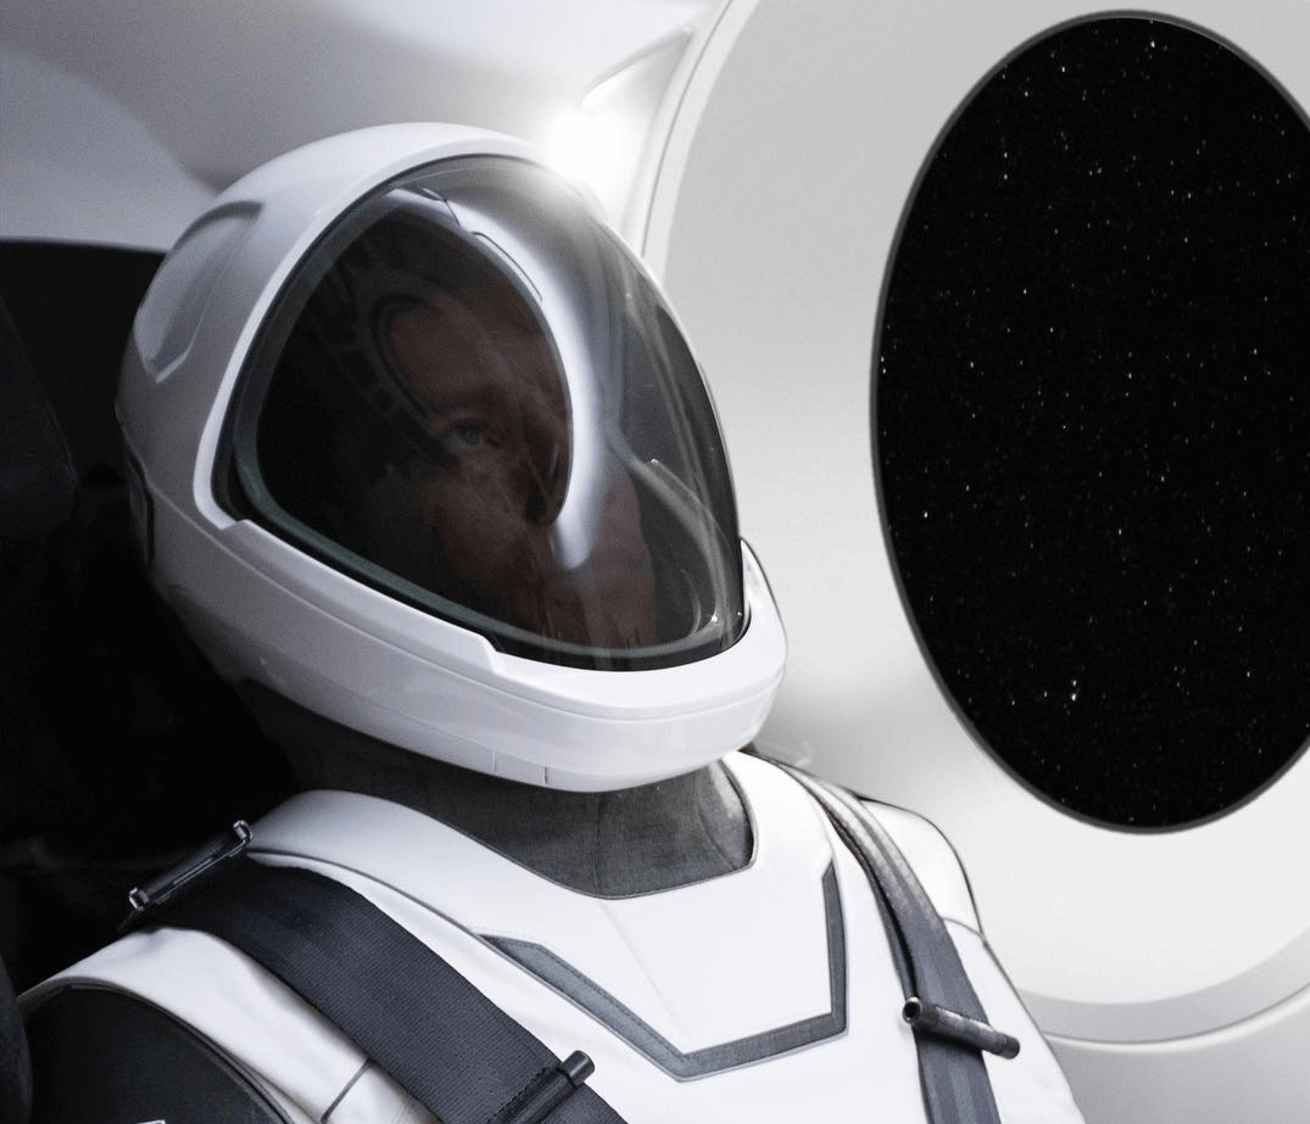 Elon Musk unveils first official image of functioning SpaceX space suit